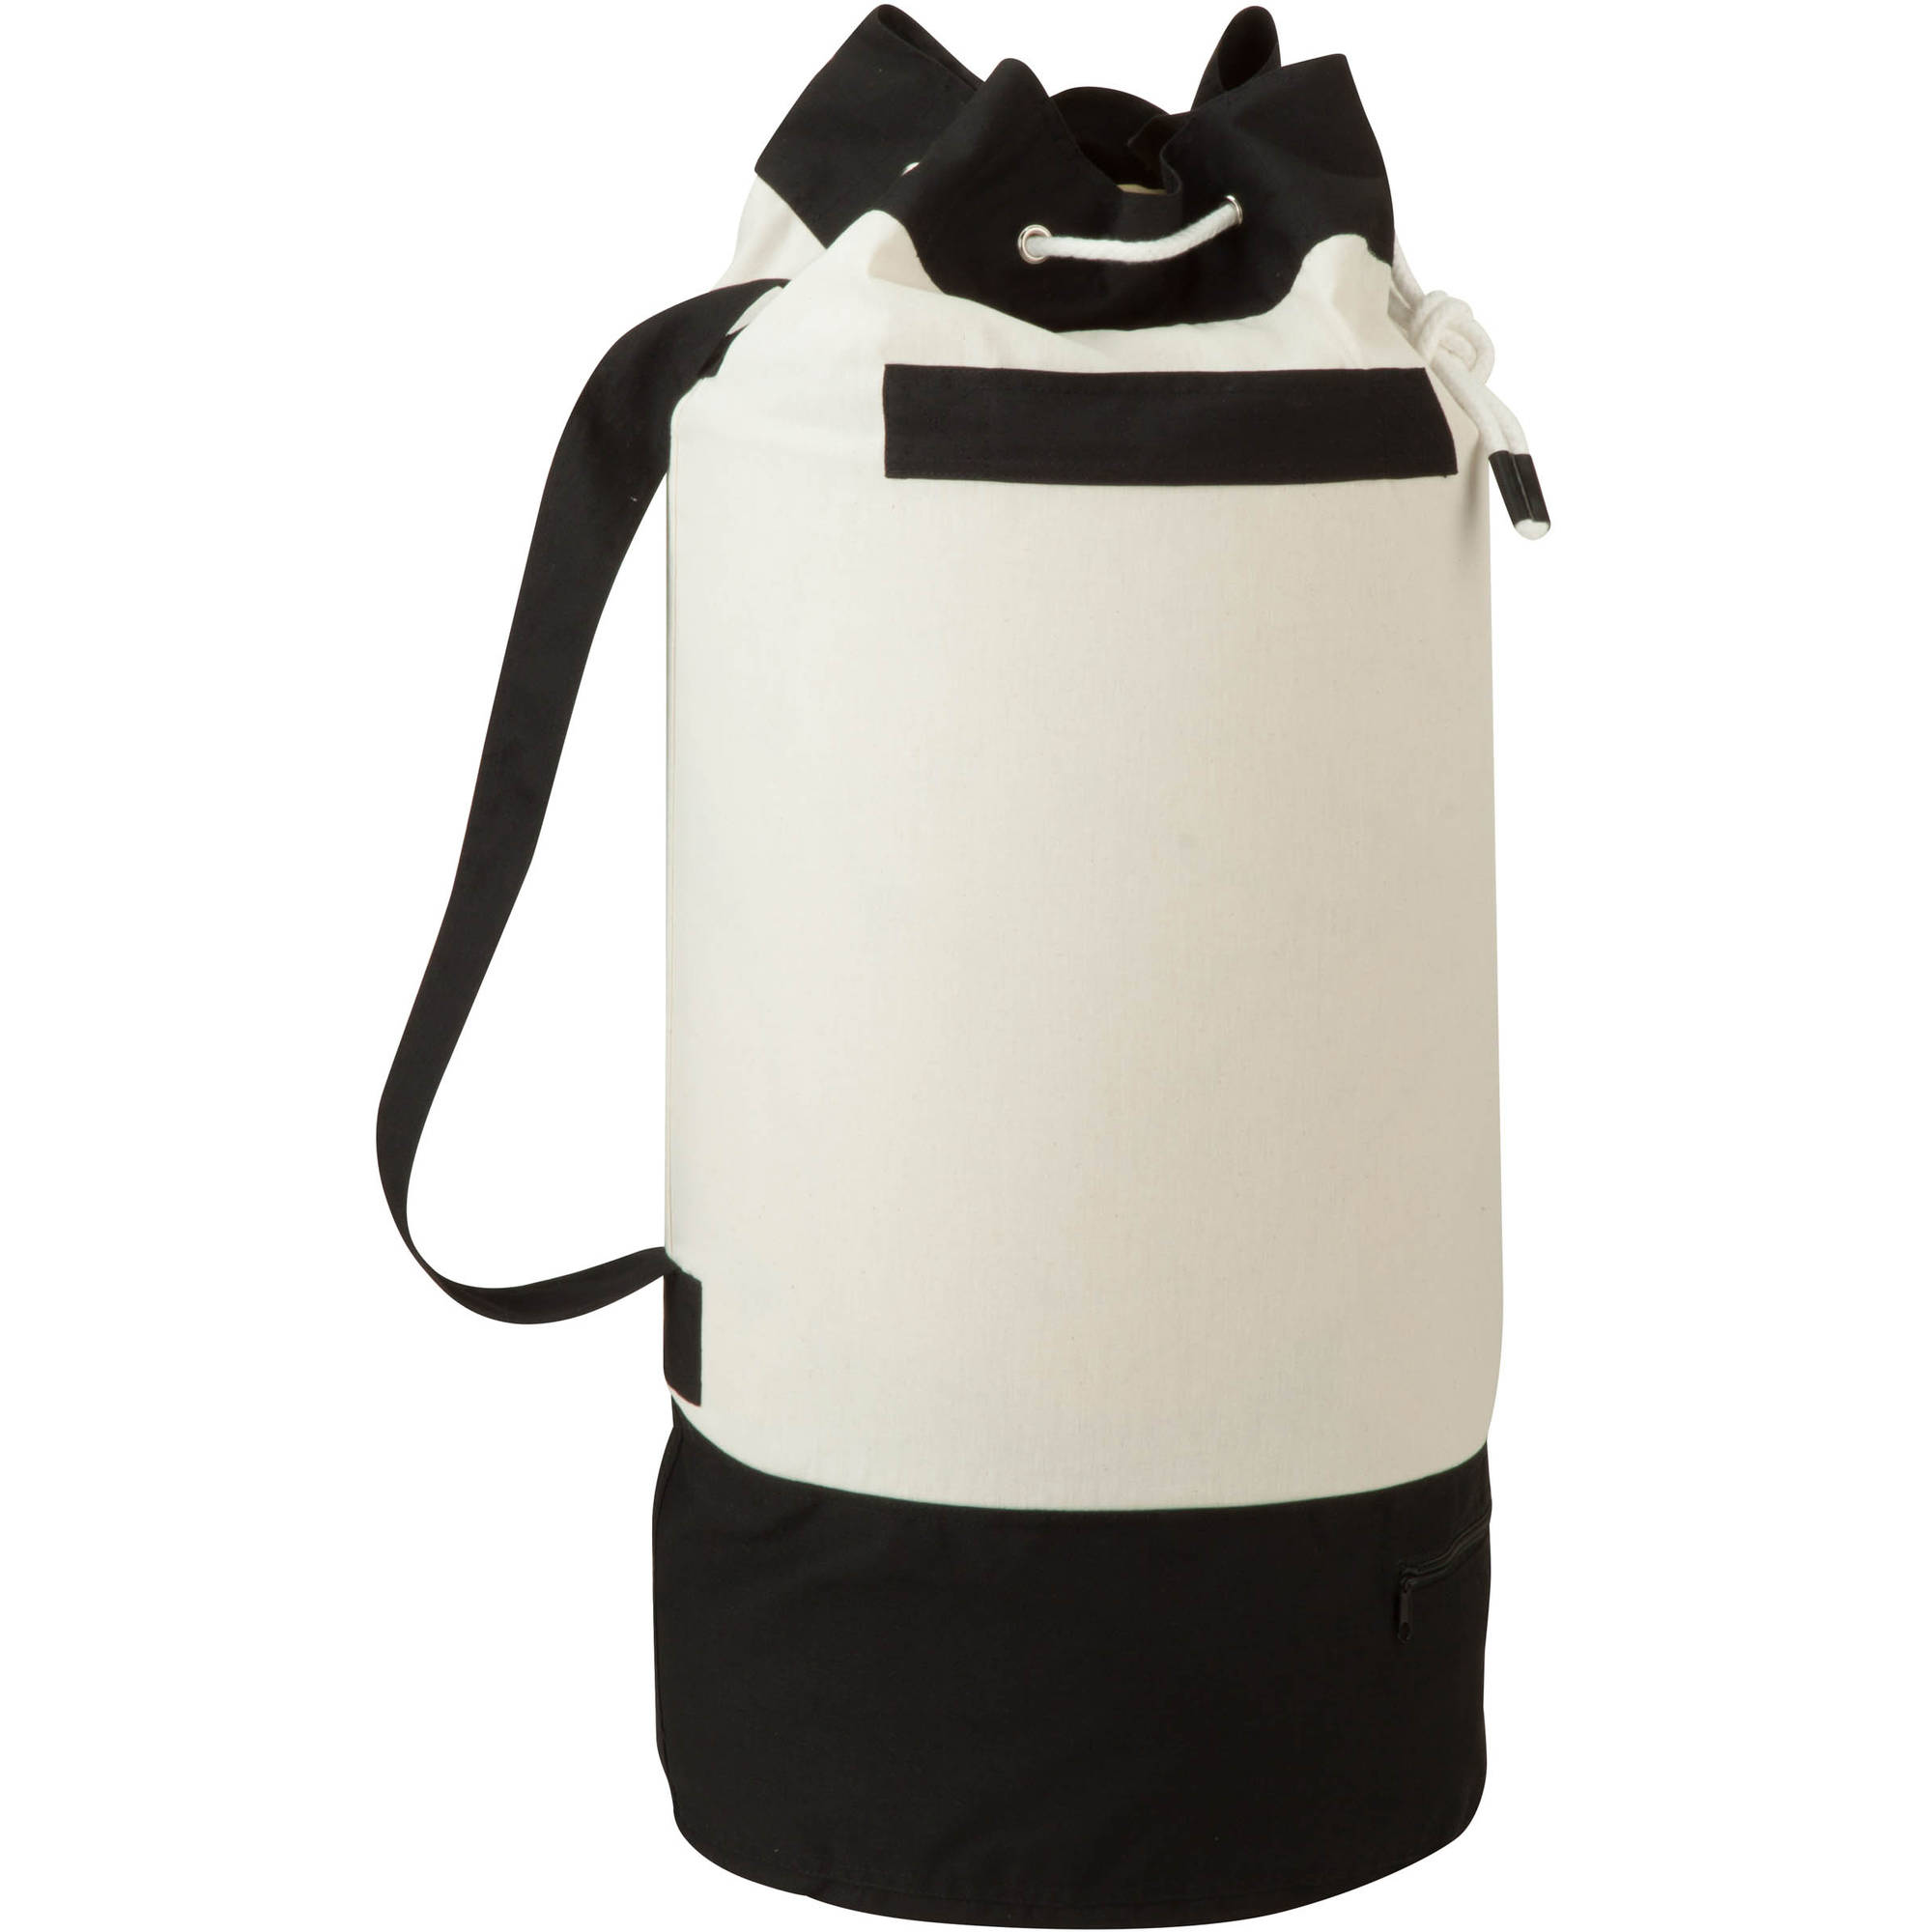 Honey-Can-Do Polyester Clothes Laundry Bag with Shoulder Strap, White/Black - image 2 of 2